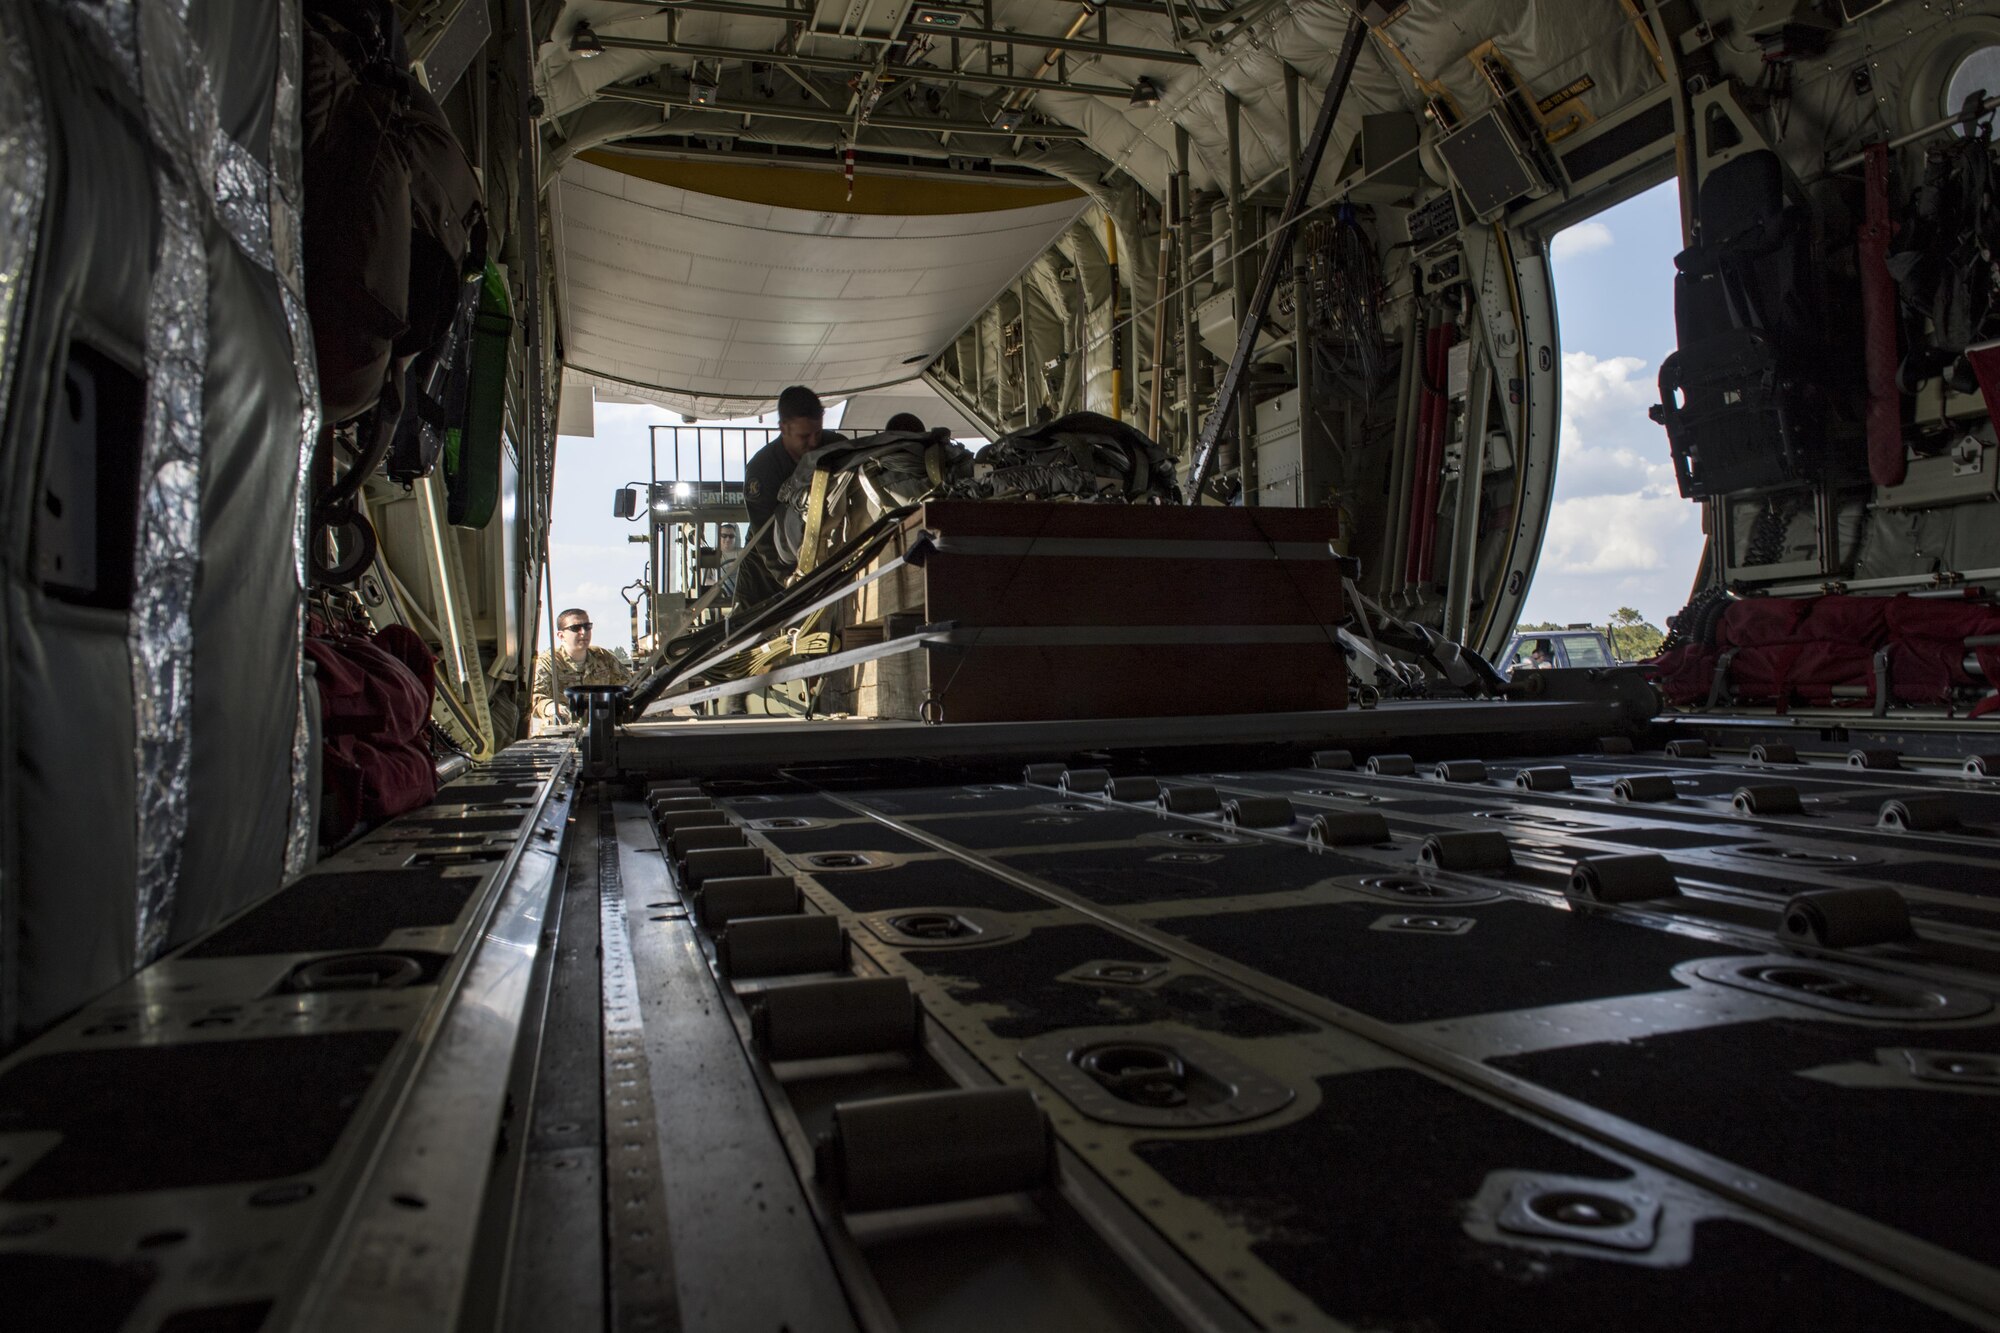 Loadmasters from the 71st Rescue Squadron secure a training bundle in an HC-130J Combat King II, April 18, 2017, at Moody Air Force Base, Ga. The training bundle weighed approximately 3,000 pounds and is designed to simulate a heavy equipment air drop. This training helps the 71st RQS remain ready to provide rapidly deployable, expeditionary personnel recovery forces to theater commanders for contingency response operations worldwide. (U.S. Air Force photo by Tech. Sgt. Zachary Wolf)